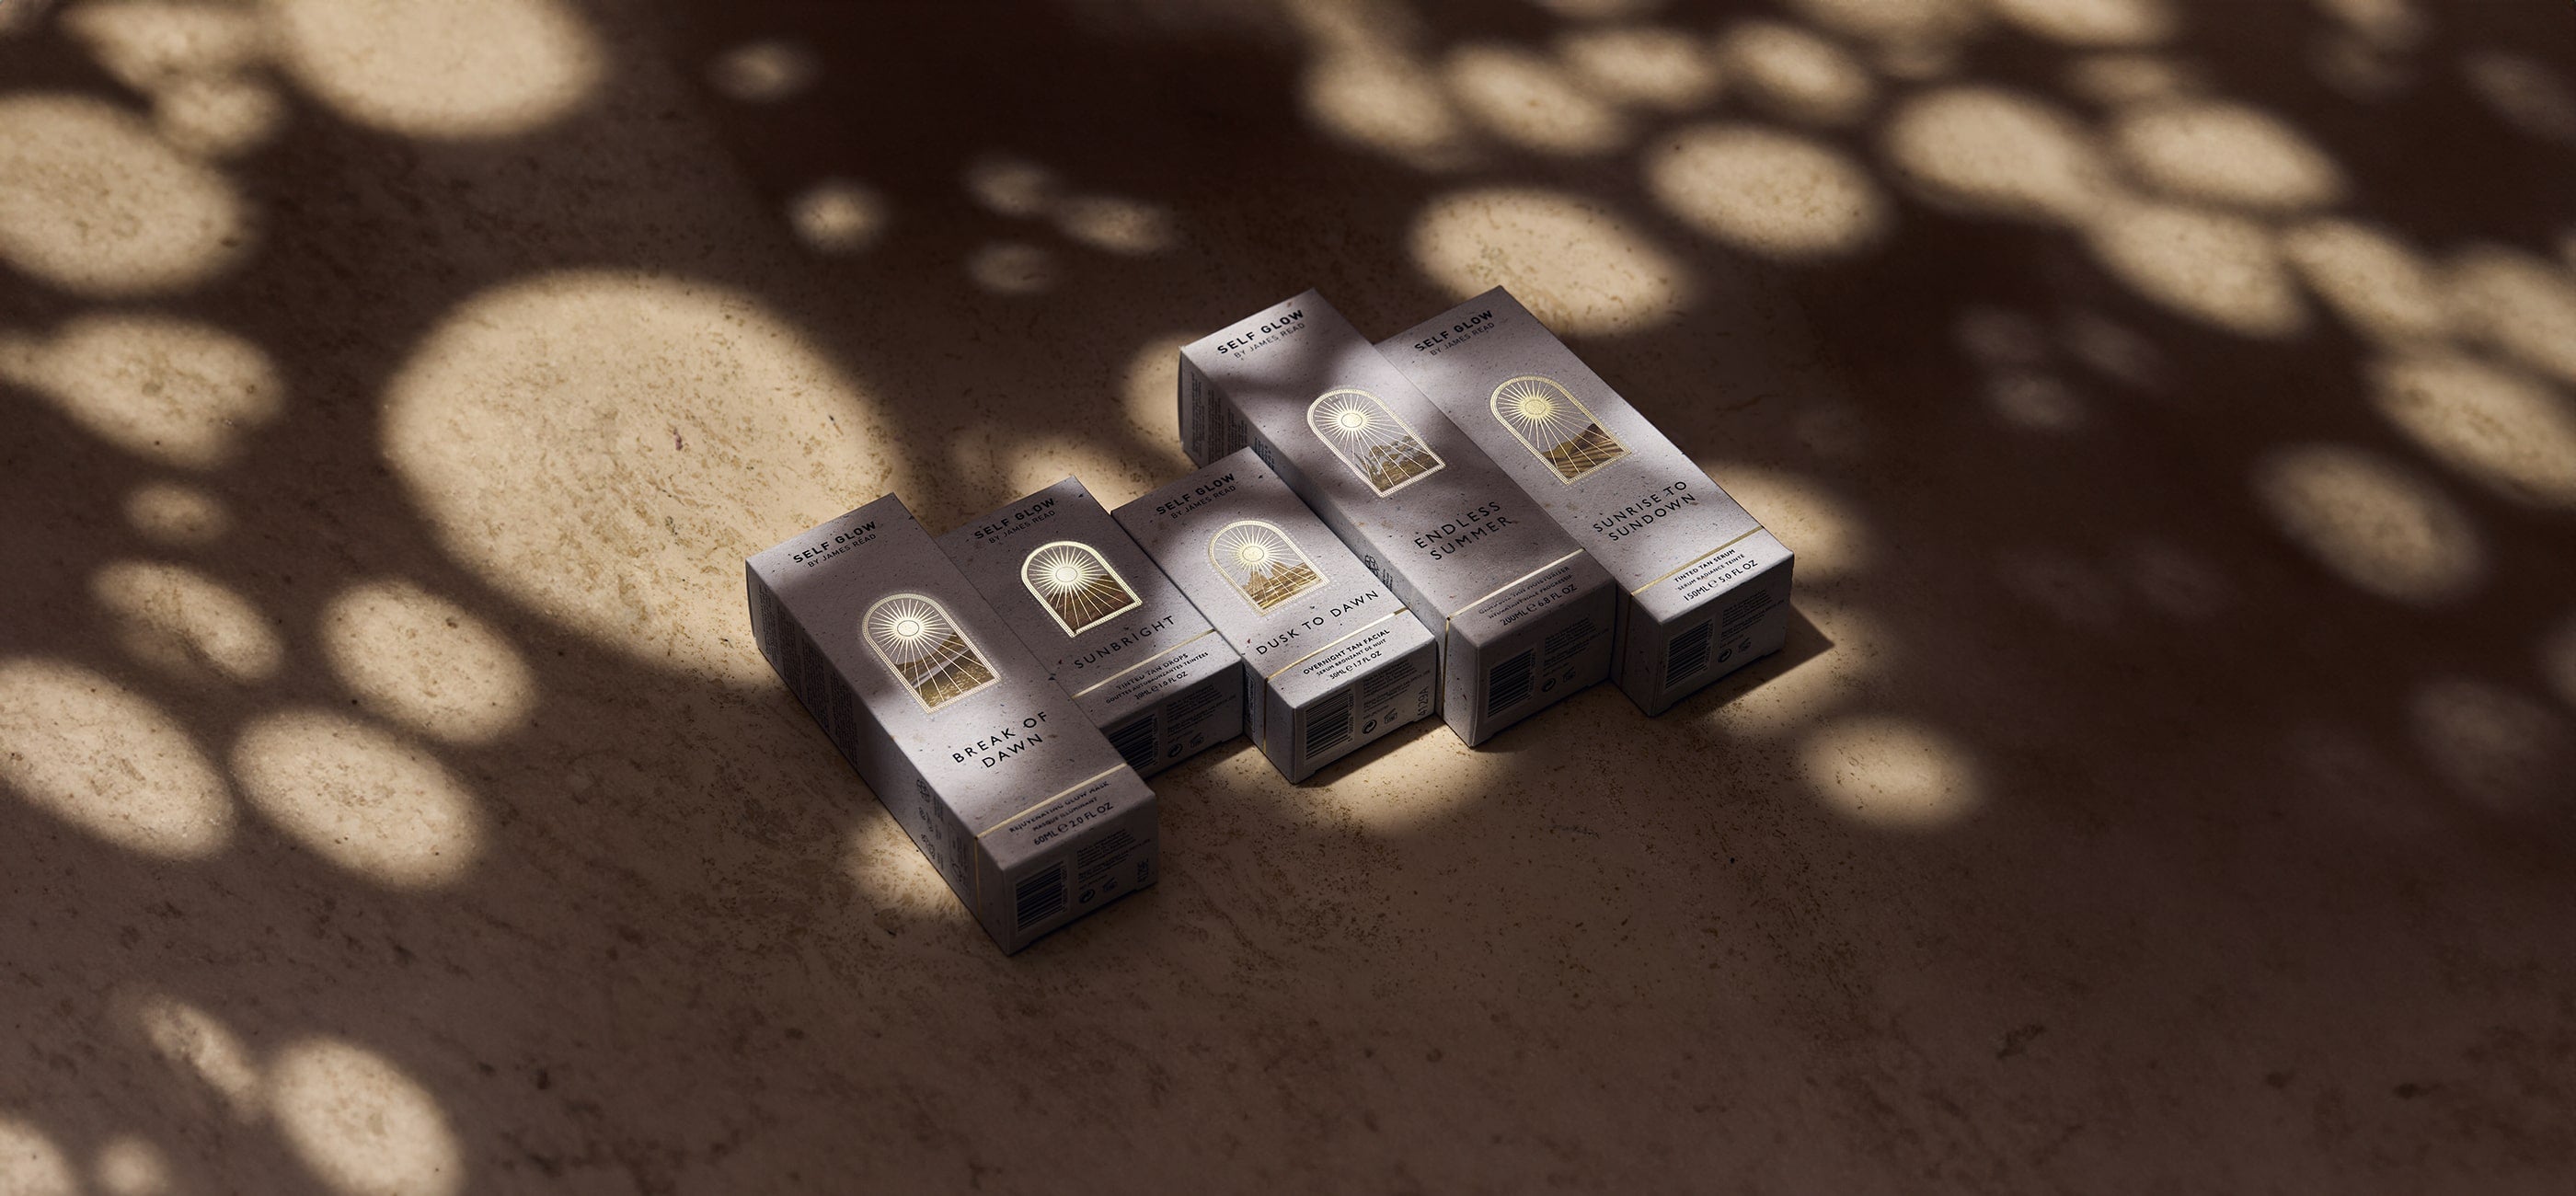 James Read Self Glow sunless tanning skincare product range in a lifestyle image with golden light, featuring product boxes for a luxurious fake tan experience.